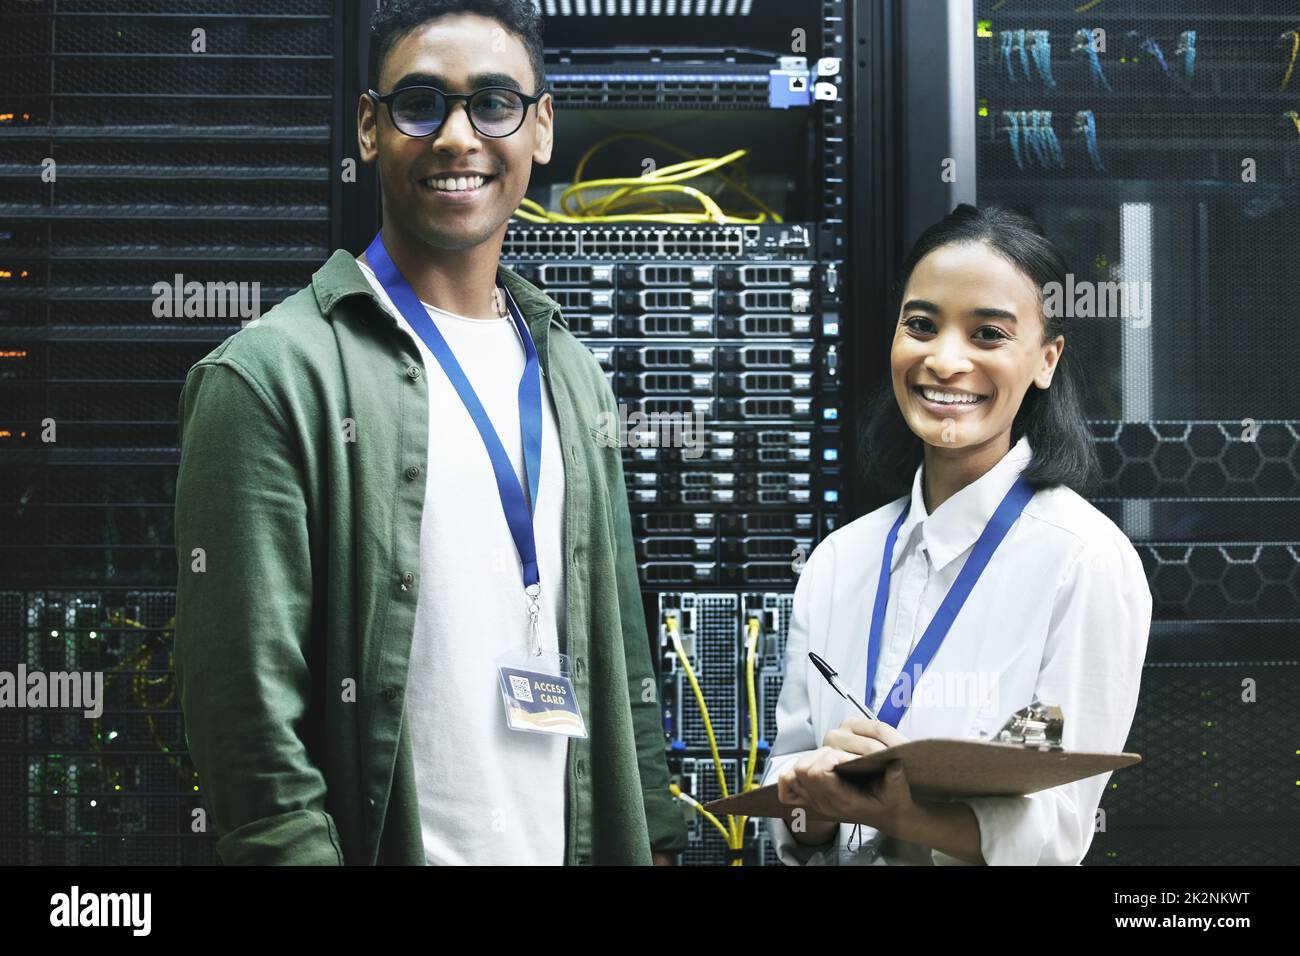 No virus, no problem. Shot of two technicians working together in a server room. Stock Photo